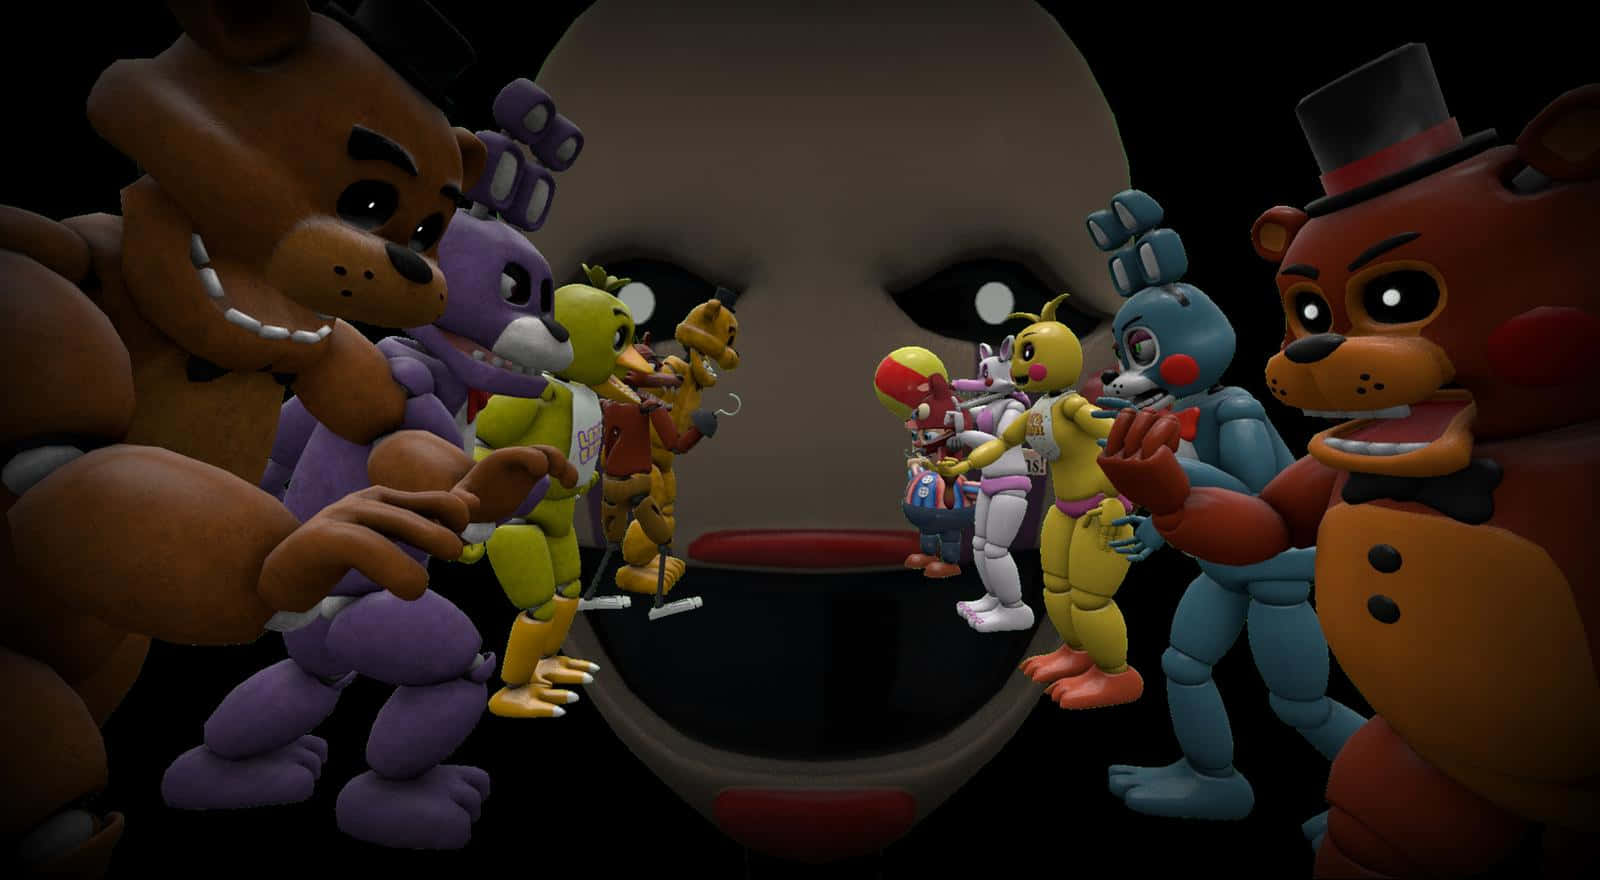 The fiery thrill of 'Five Nights at Freddy's'